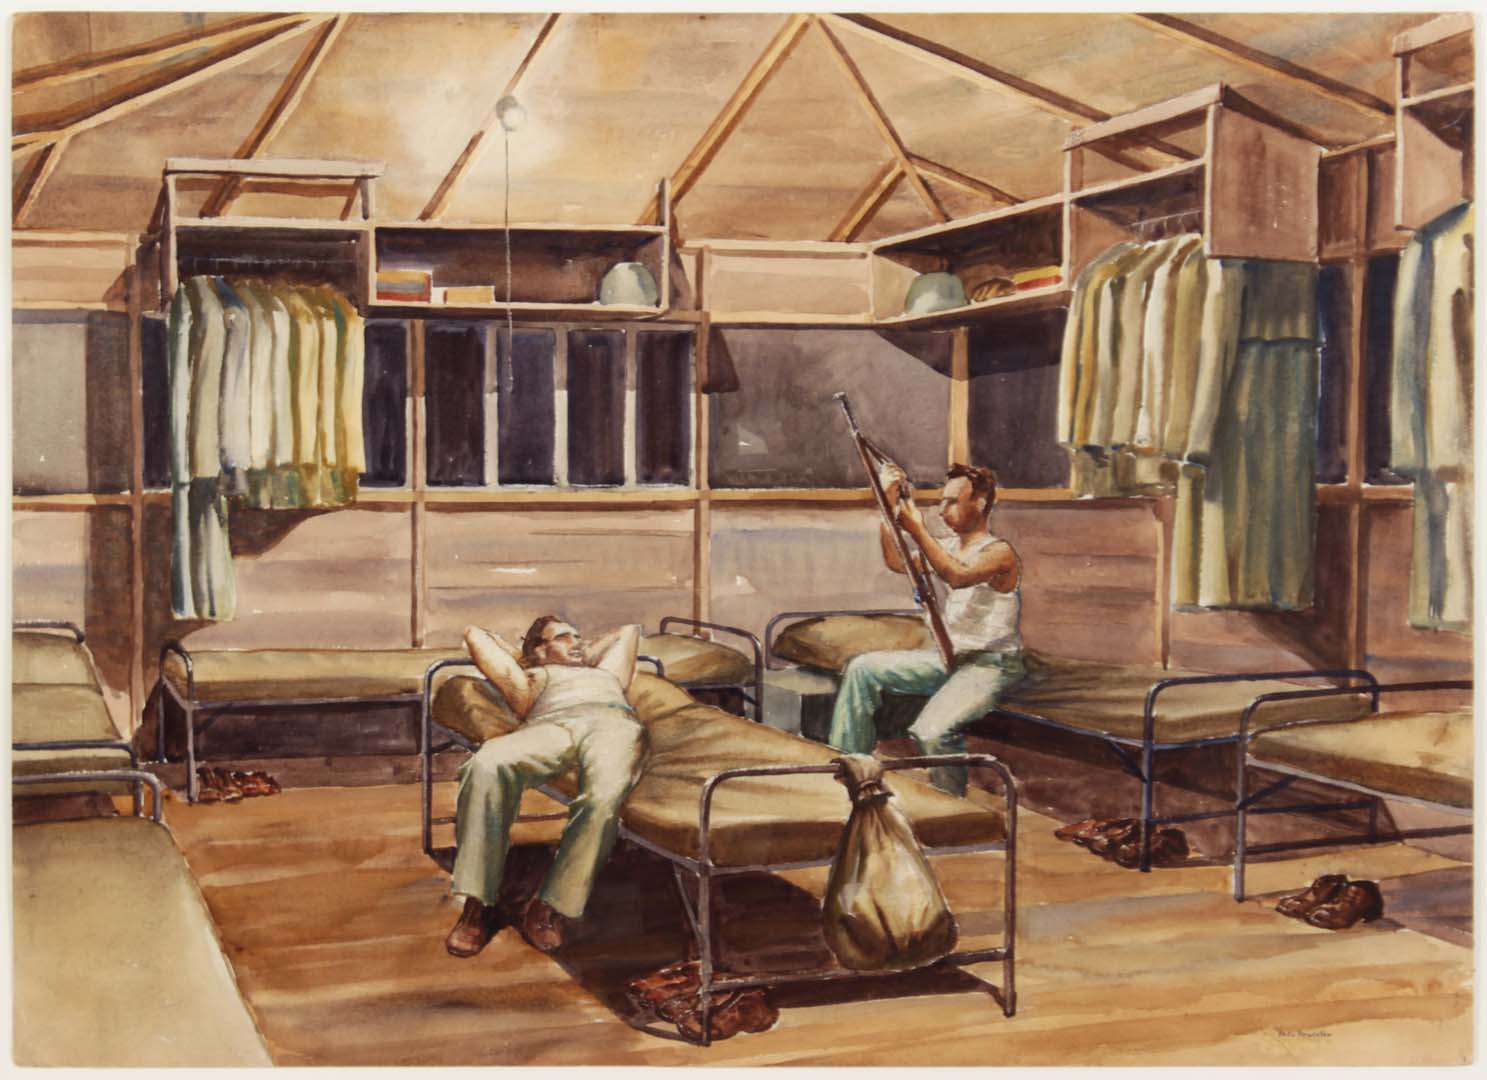 1943 Two Soldiers in Hut Camp Blanding [#28] Watercolor on Paper 21.25 x 29.5